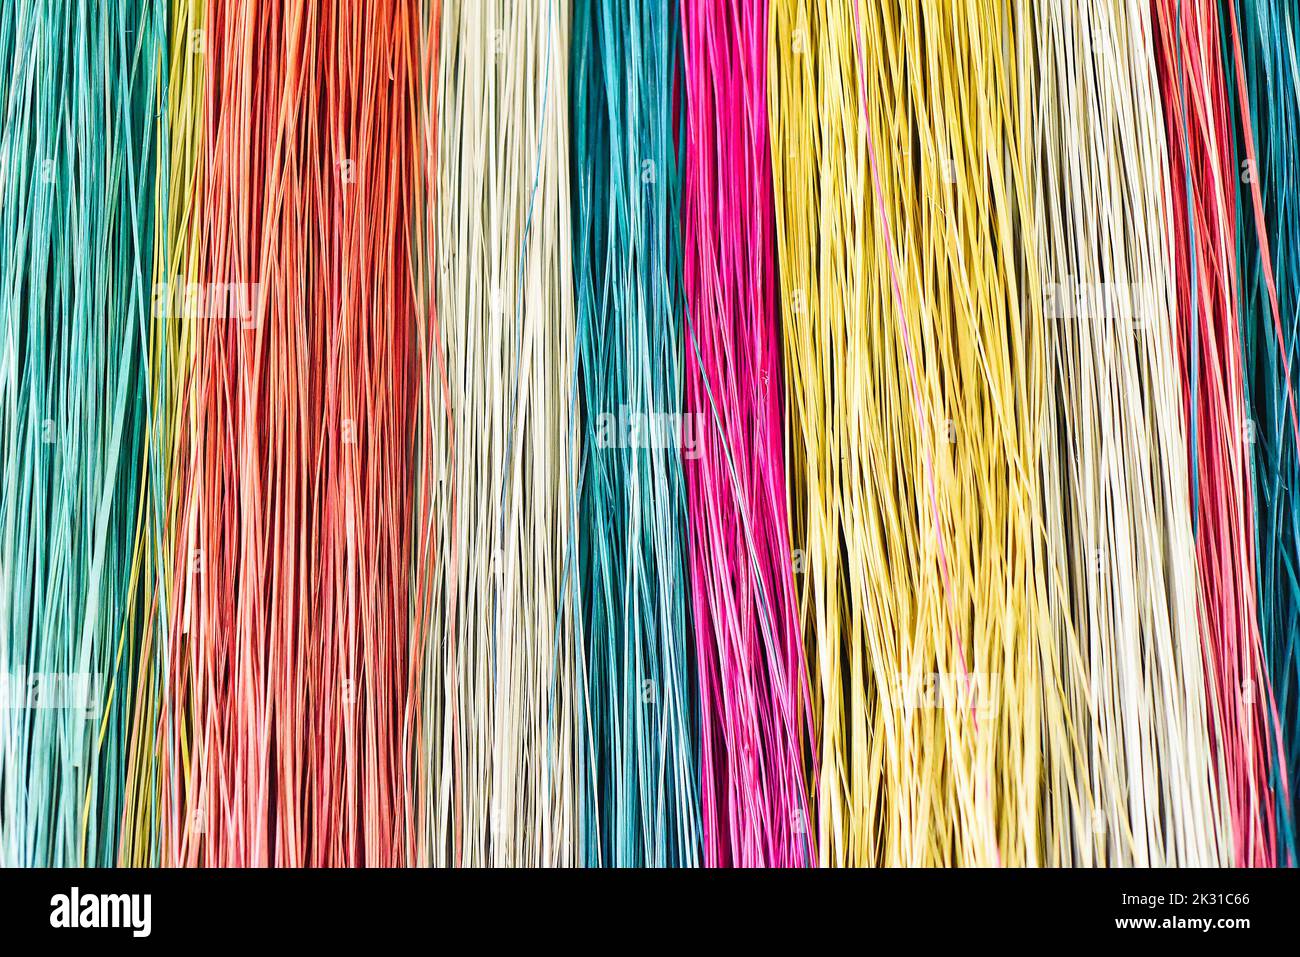 Many colorful prepared threads for weaving close up background Stock Photo